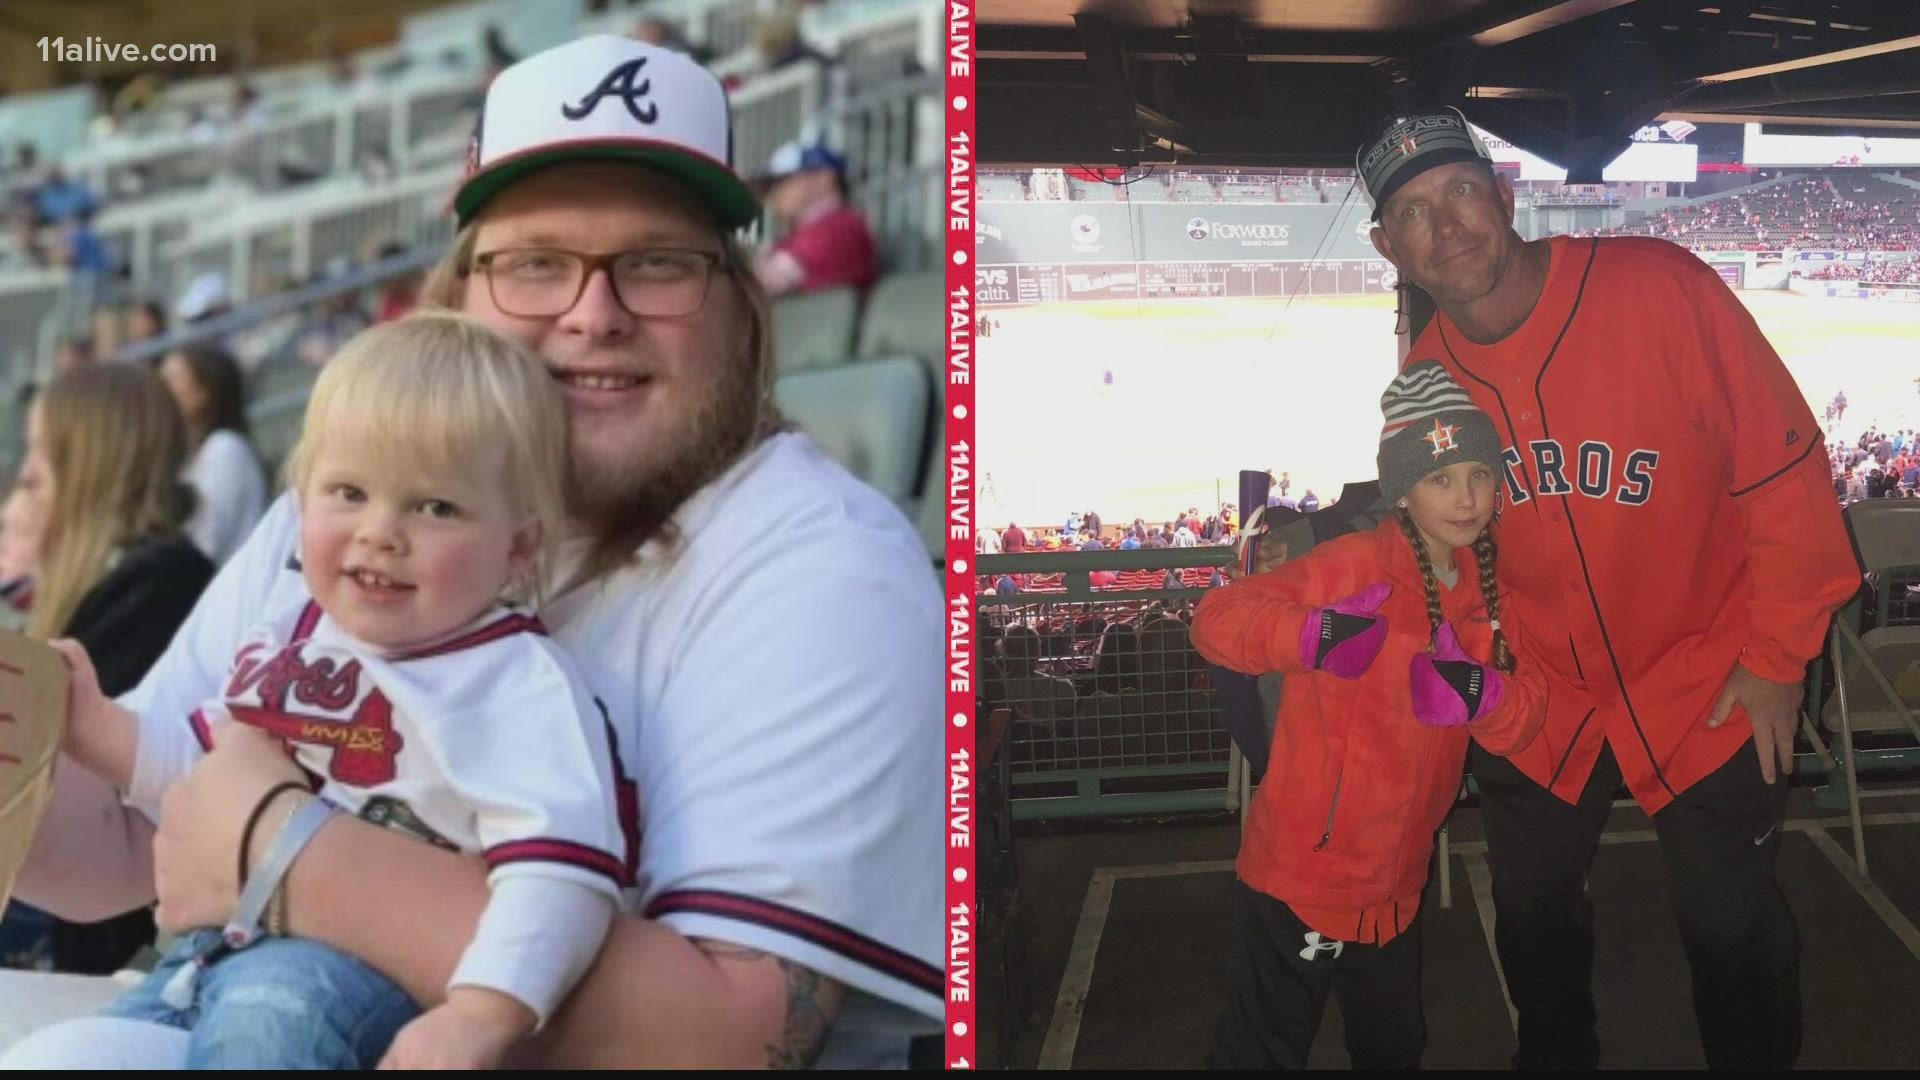 An Astros fan got the gift of a lifetime from a total stranger...on the other team.